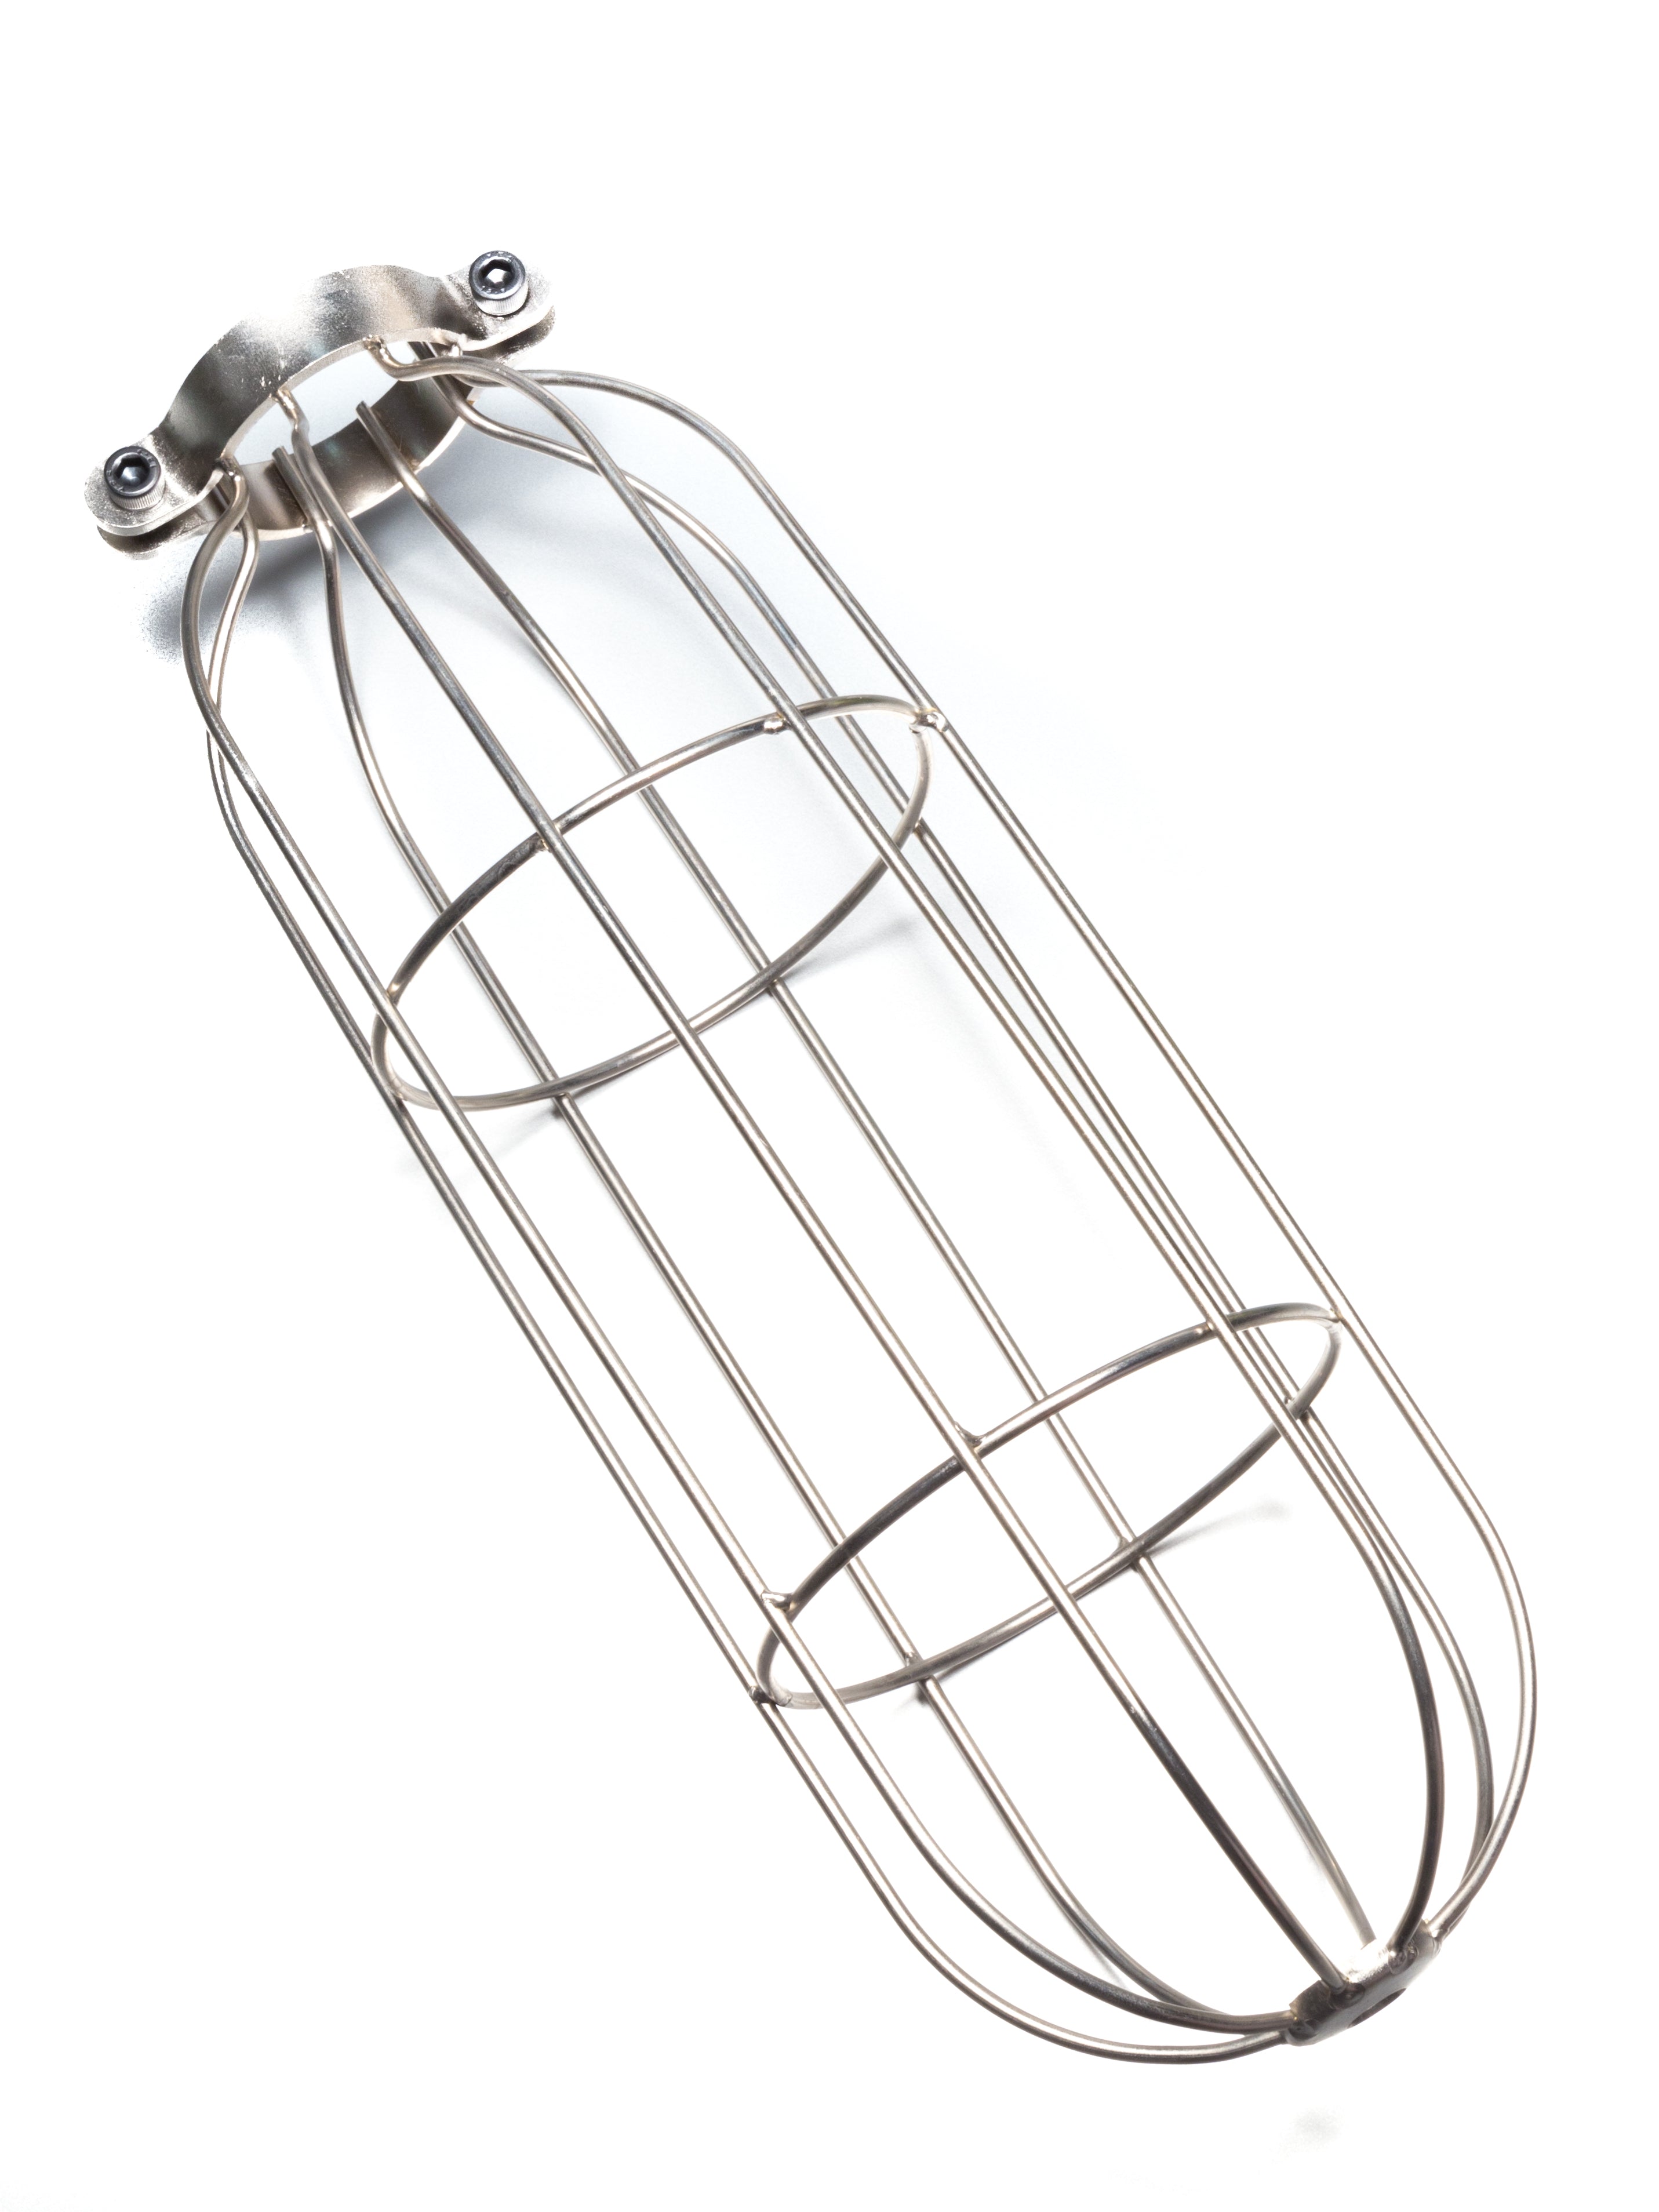 Silver Long Cage Pendant | End-Of-Line